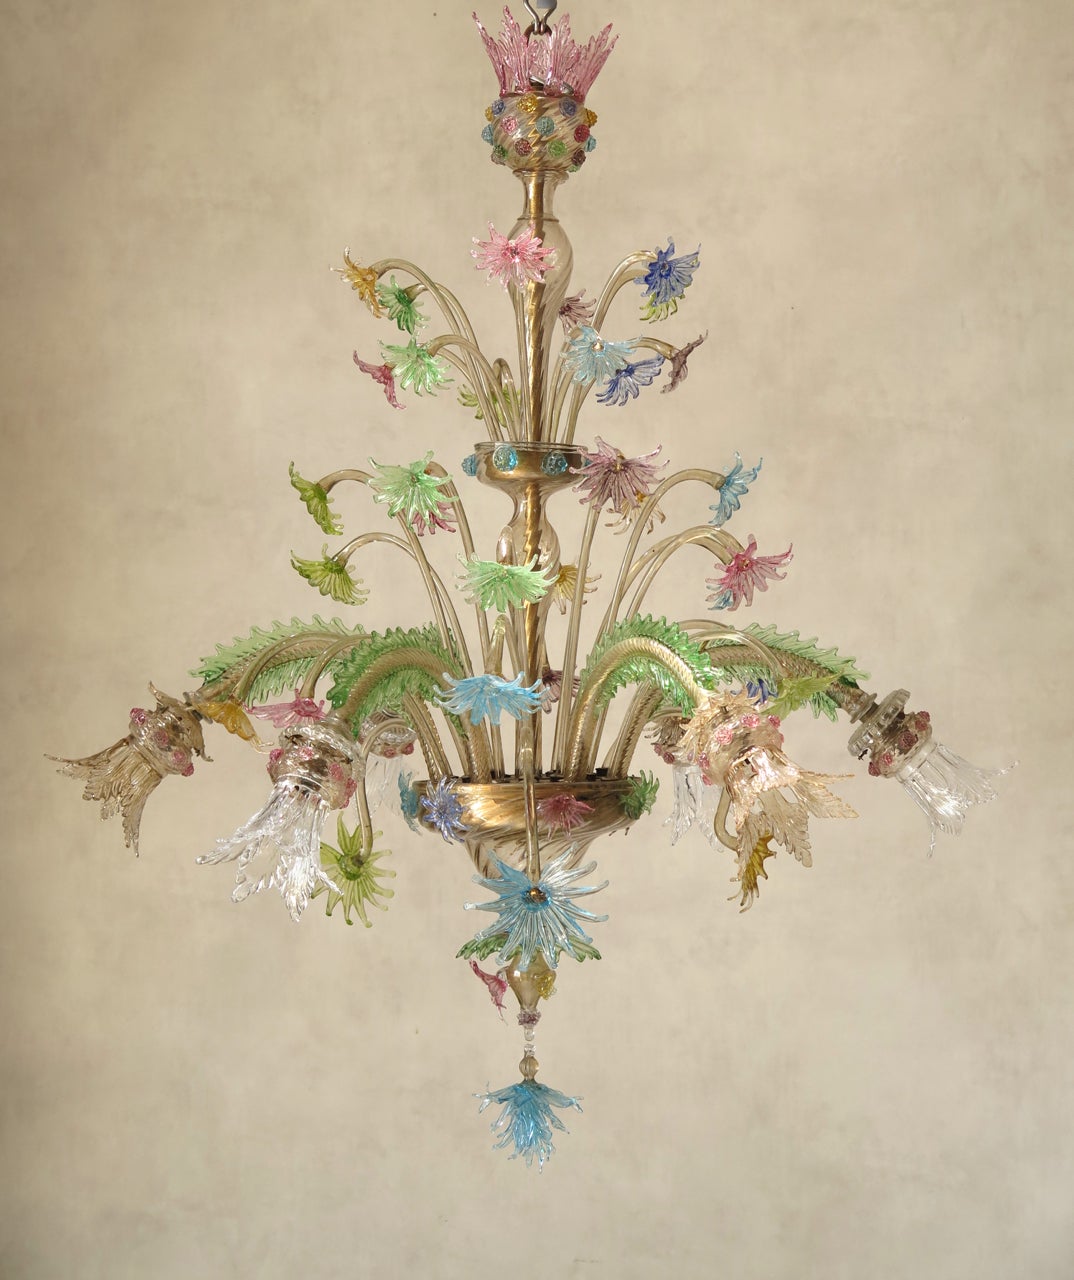 Rare, elegant and delicately-coloured six-light Venetian chandelier, in pale champagne, pink, blue, green and yellow handblown glass. Beautifully made.